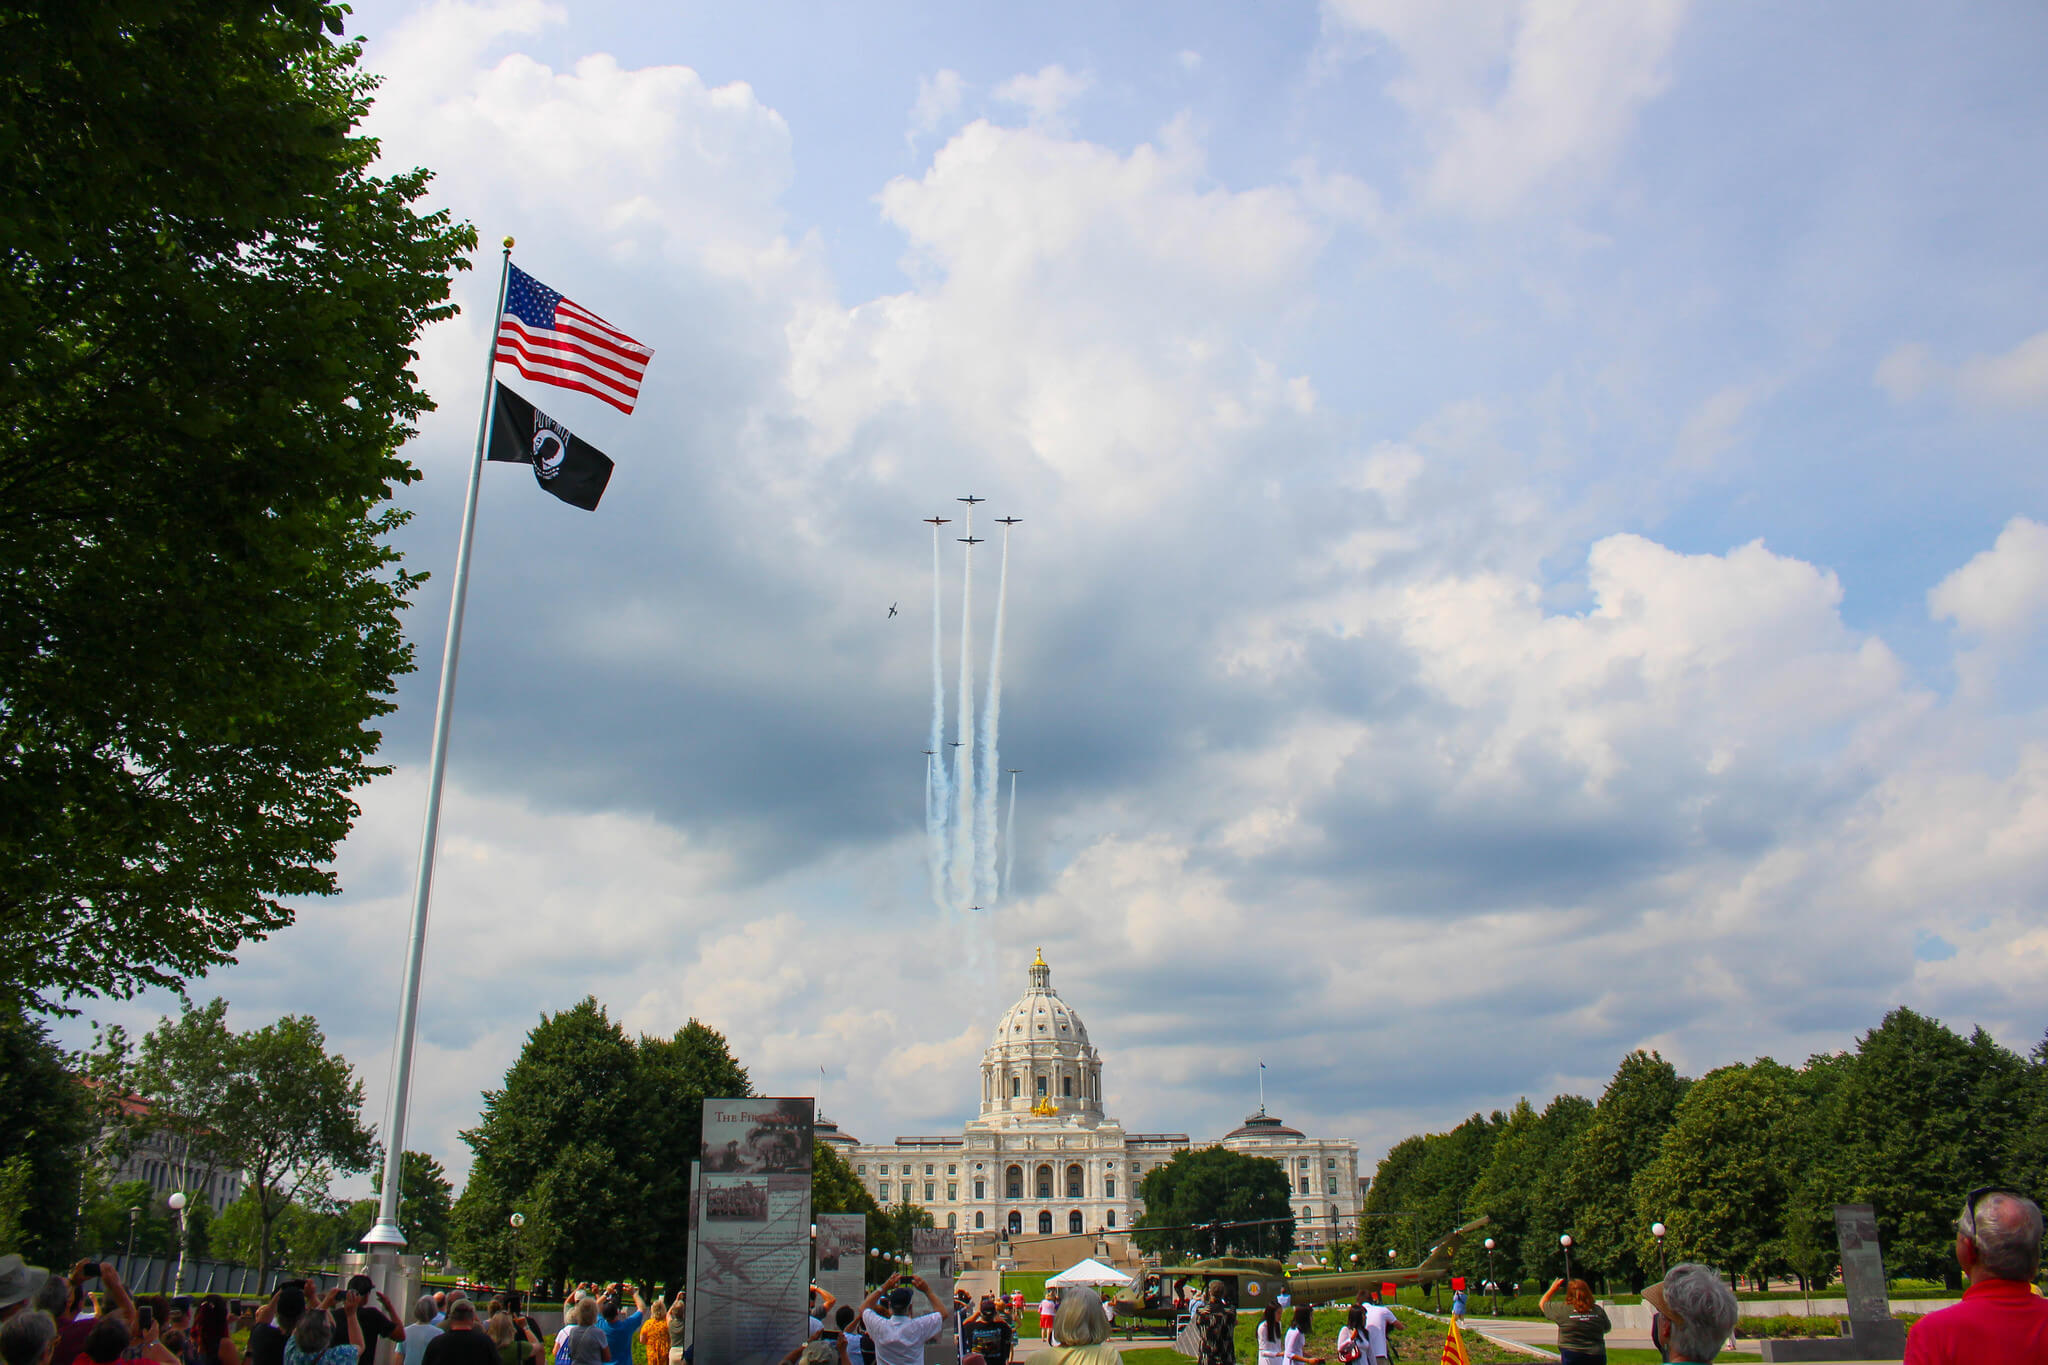 Flyover of aircraft over the Minnesota State Capitol.